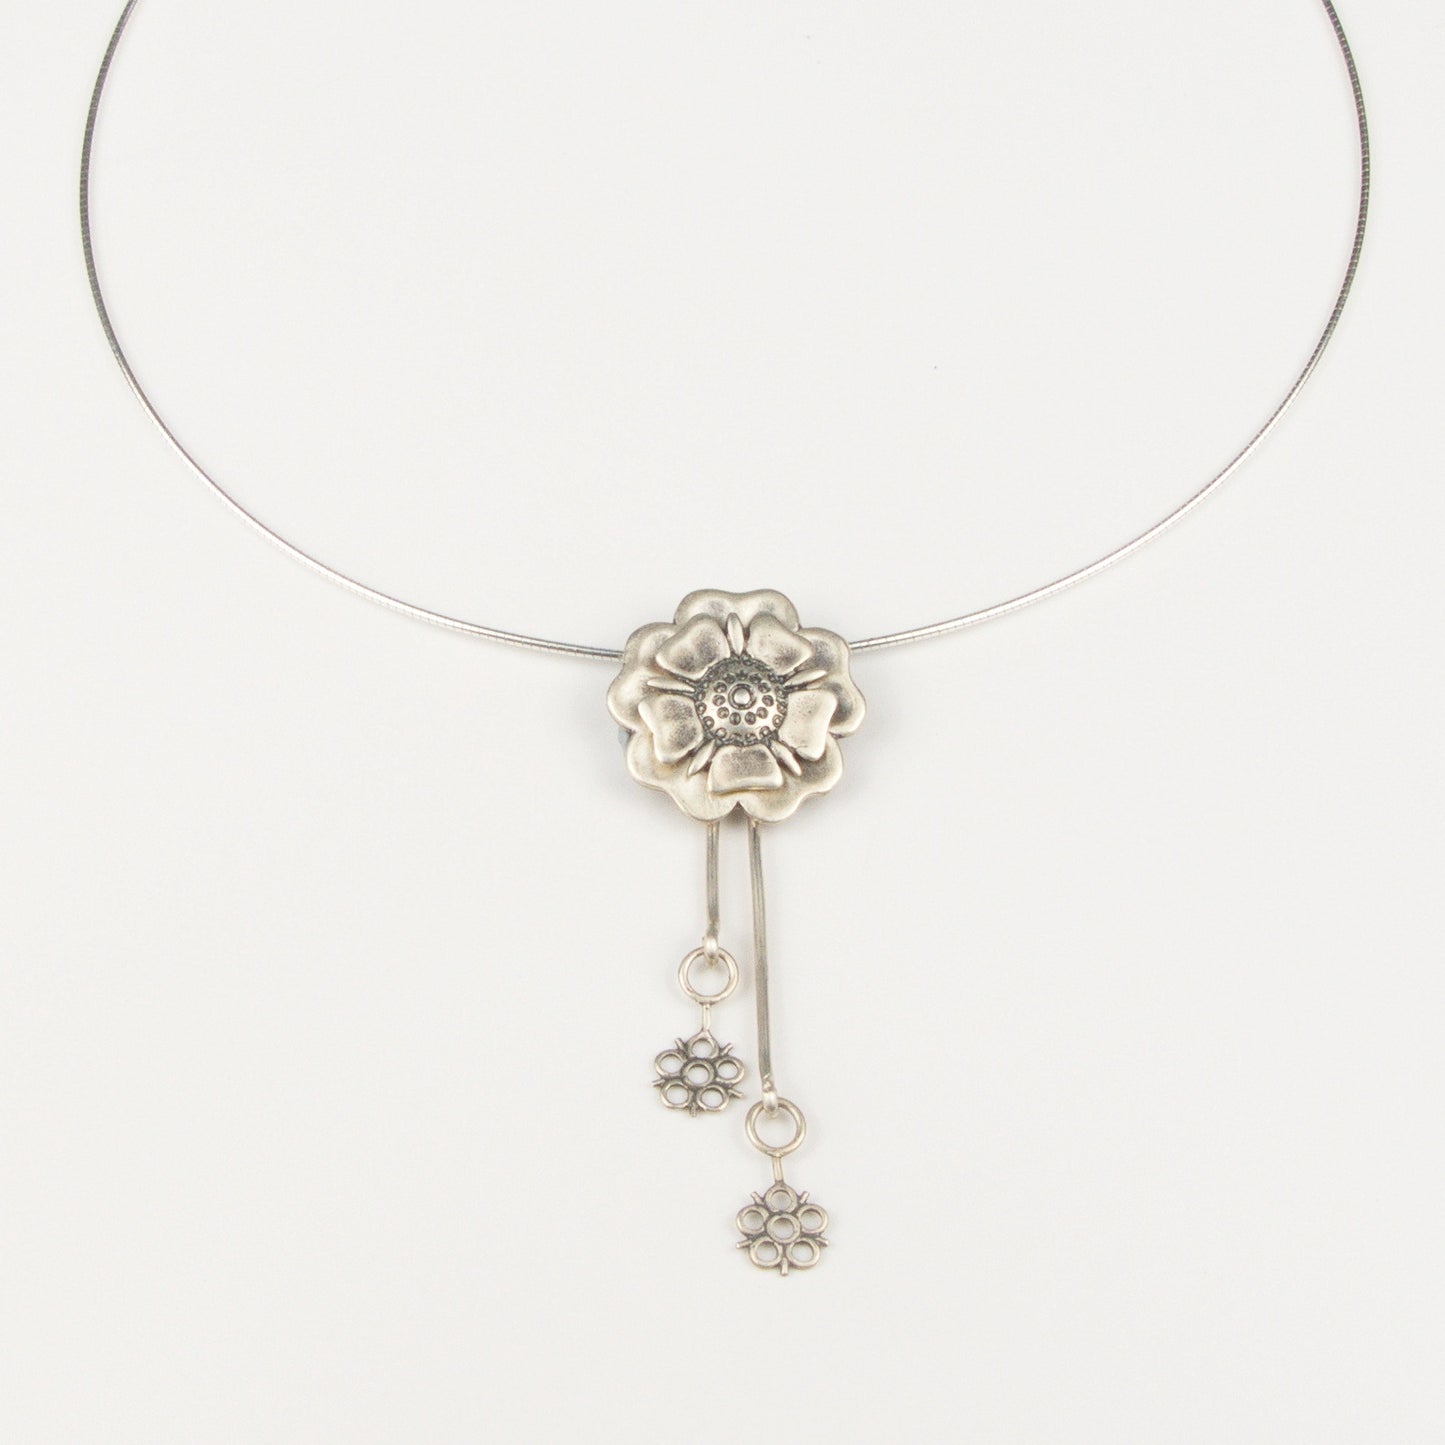 Outlander Jacobite Rose Coin Collection necklace with rose charm and drop detail on a white background with rose by Aurora Jewellery, Orkney, Scotland